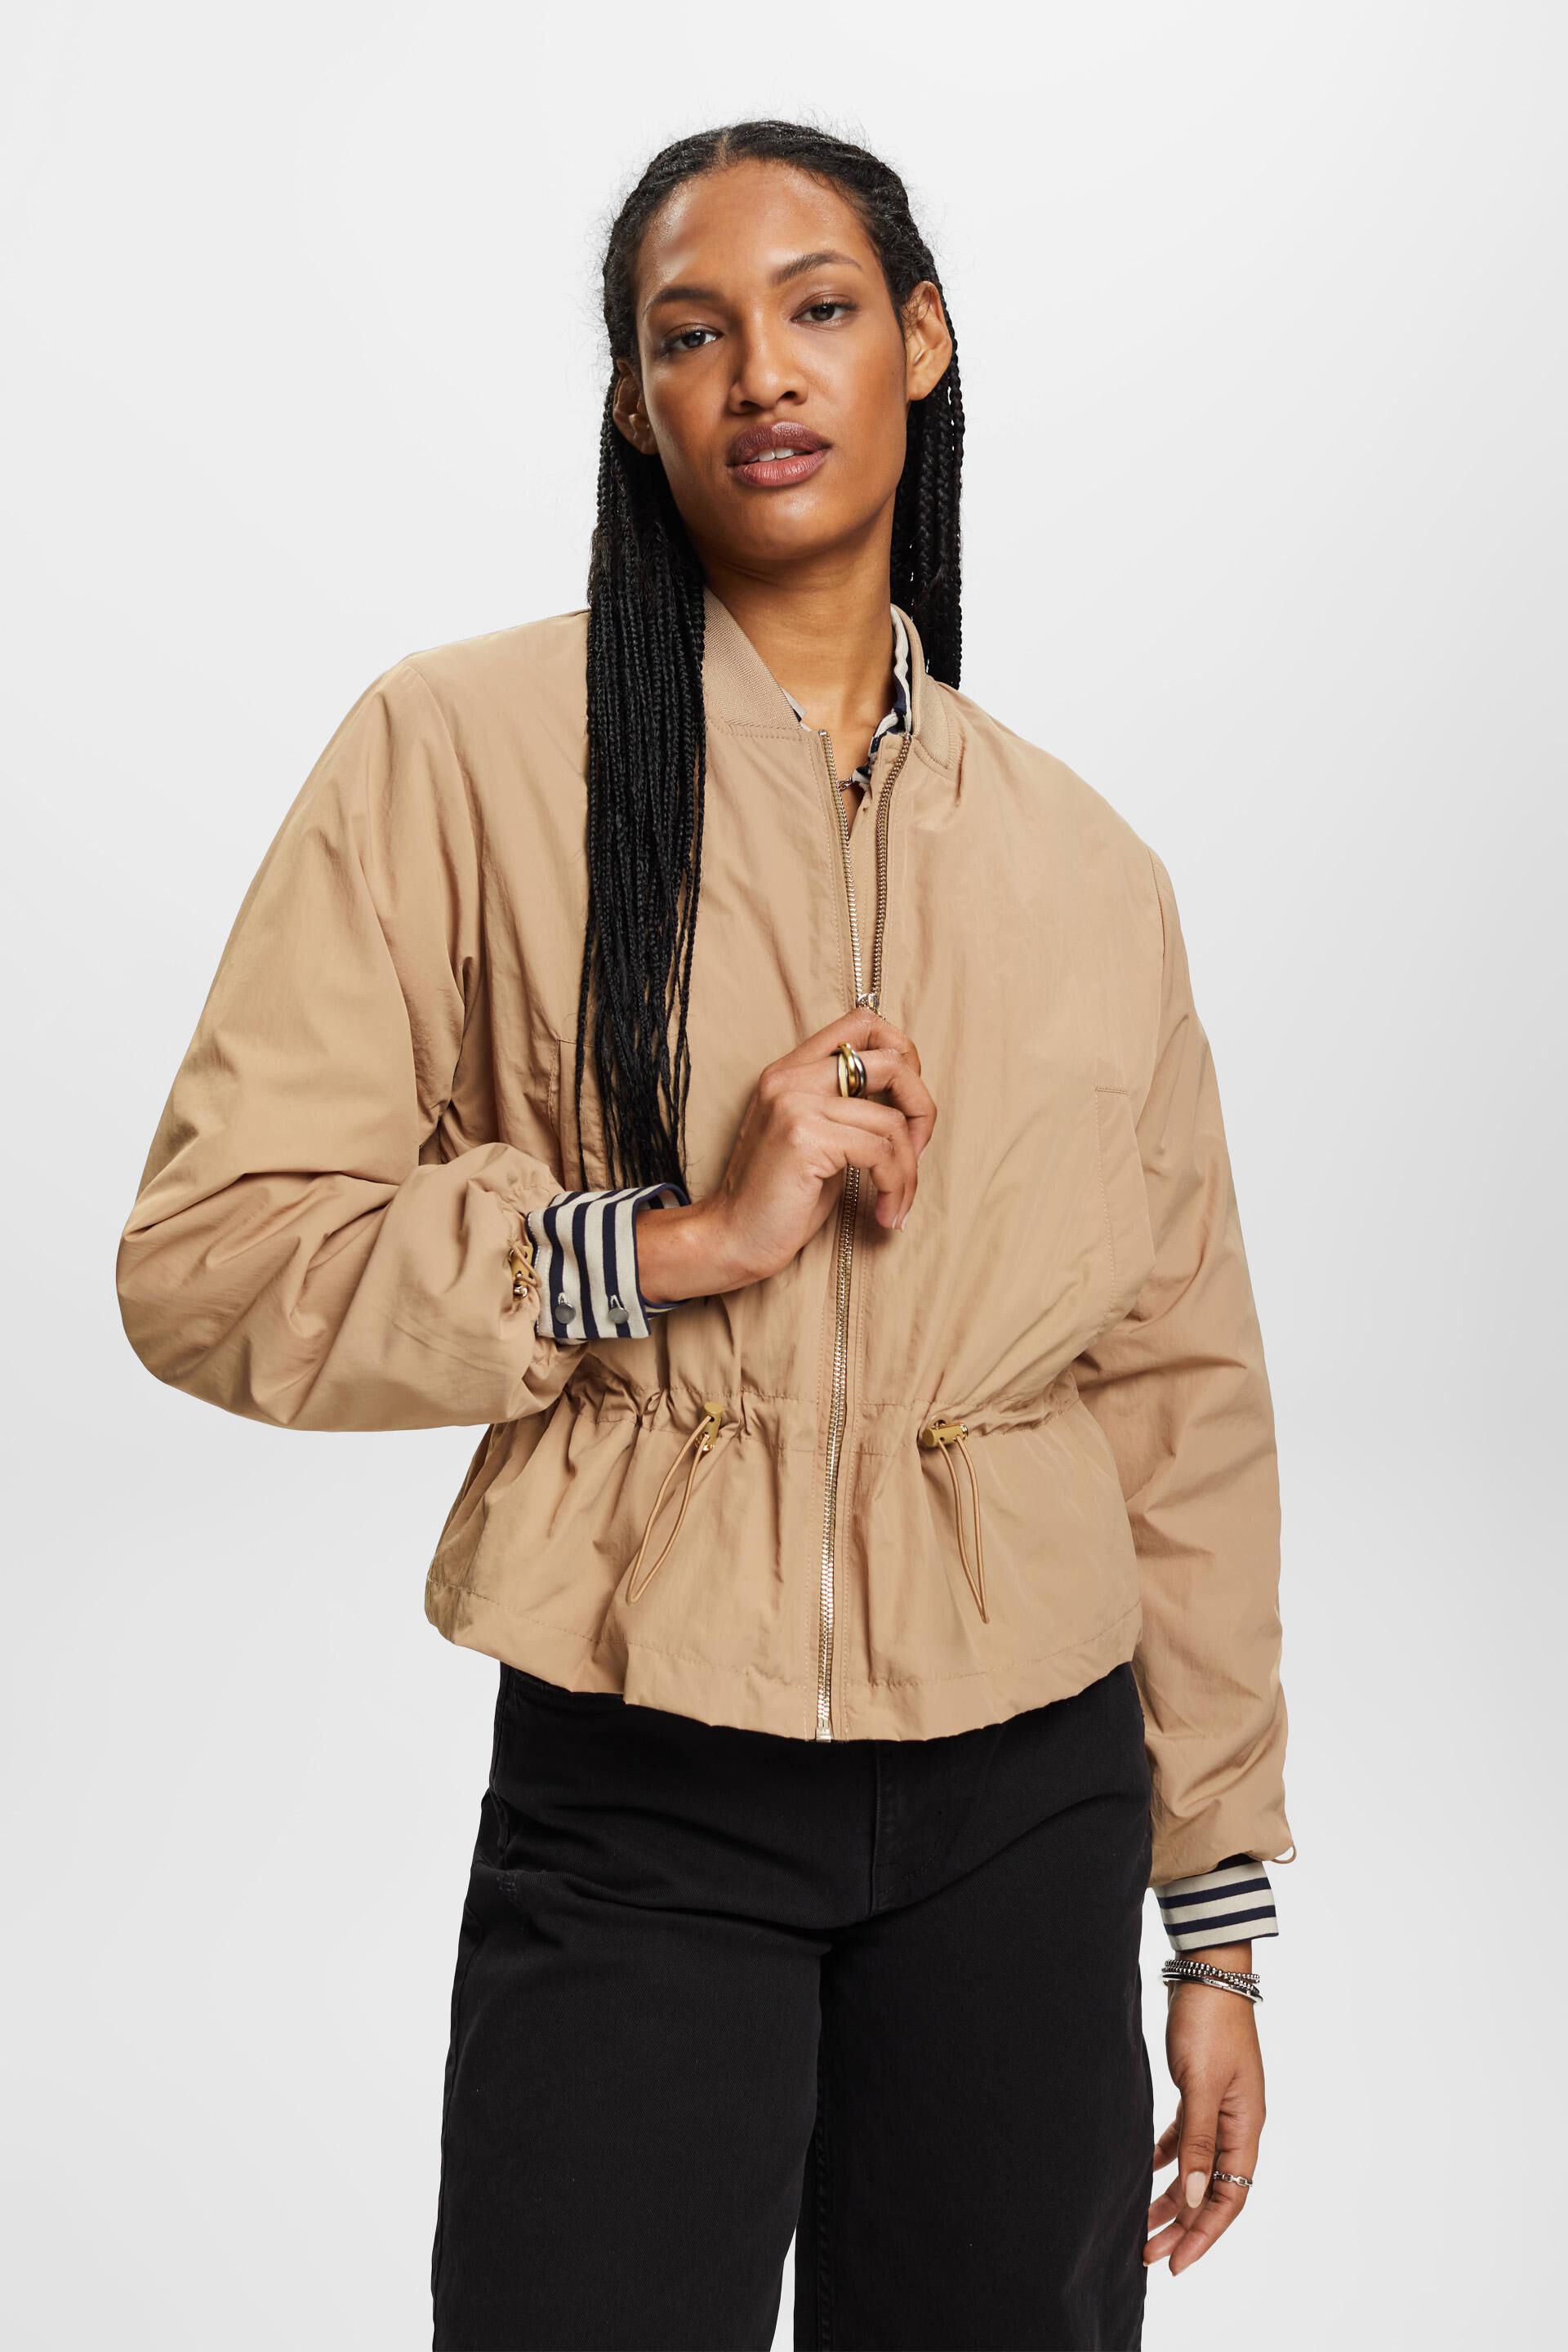 ESPRIT - Bomber jacket with drawstring waist at our online shop